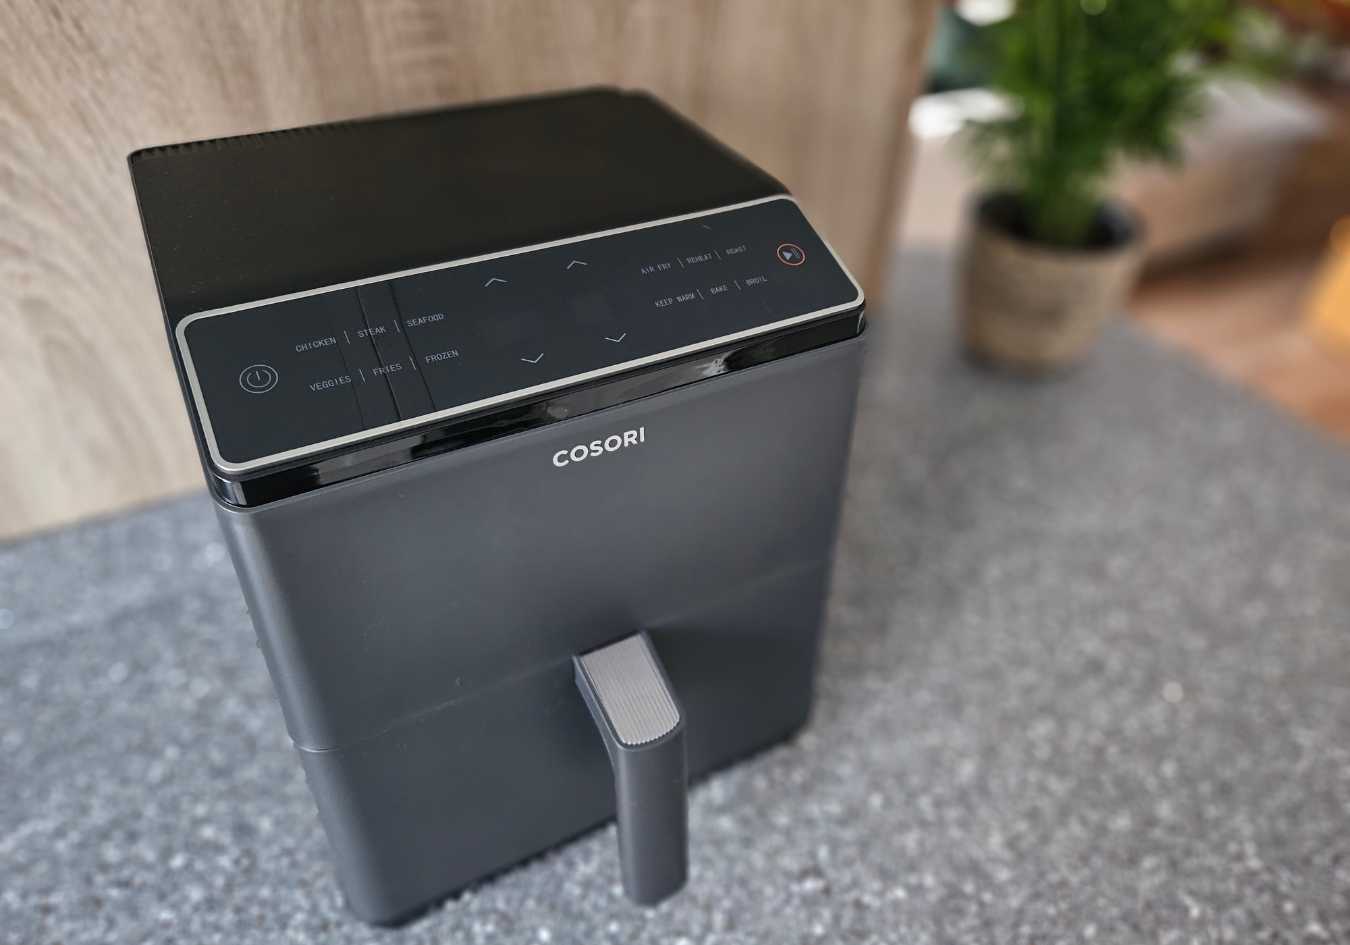 Cosori air fryer review: The best air fryer? » Edible Ethics